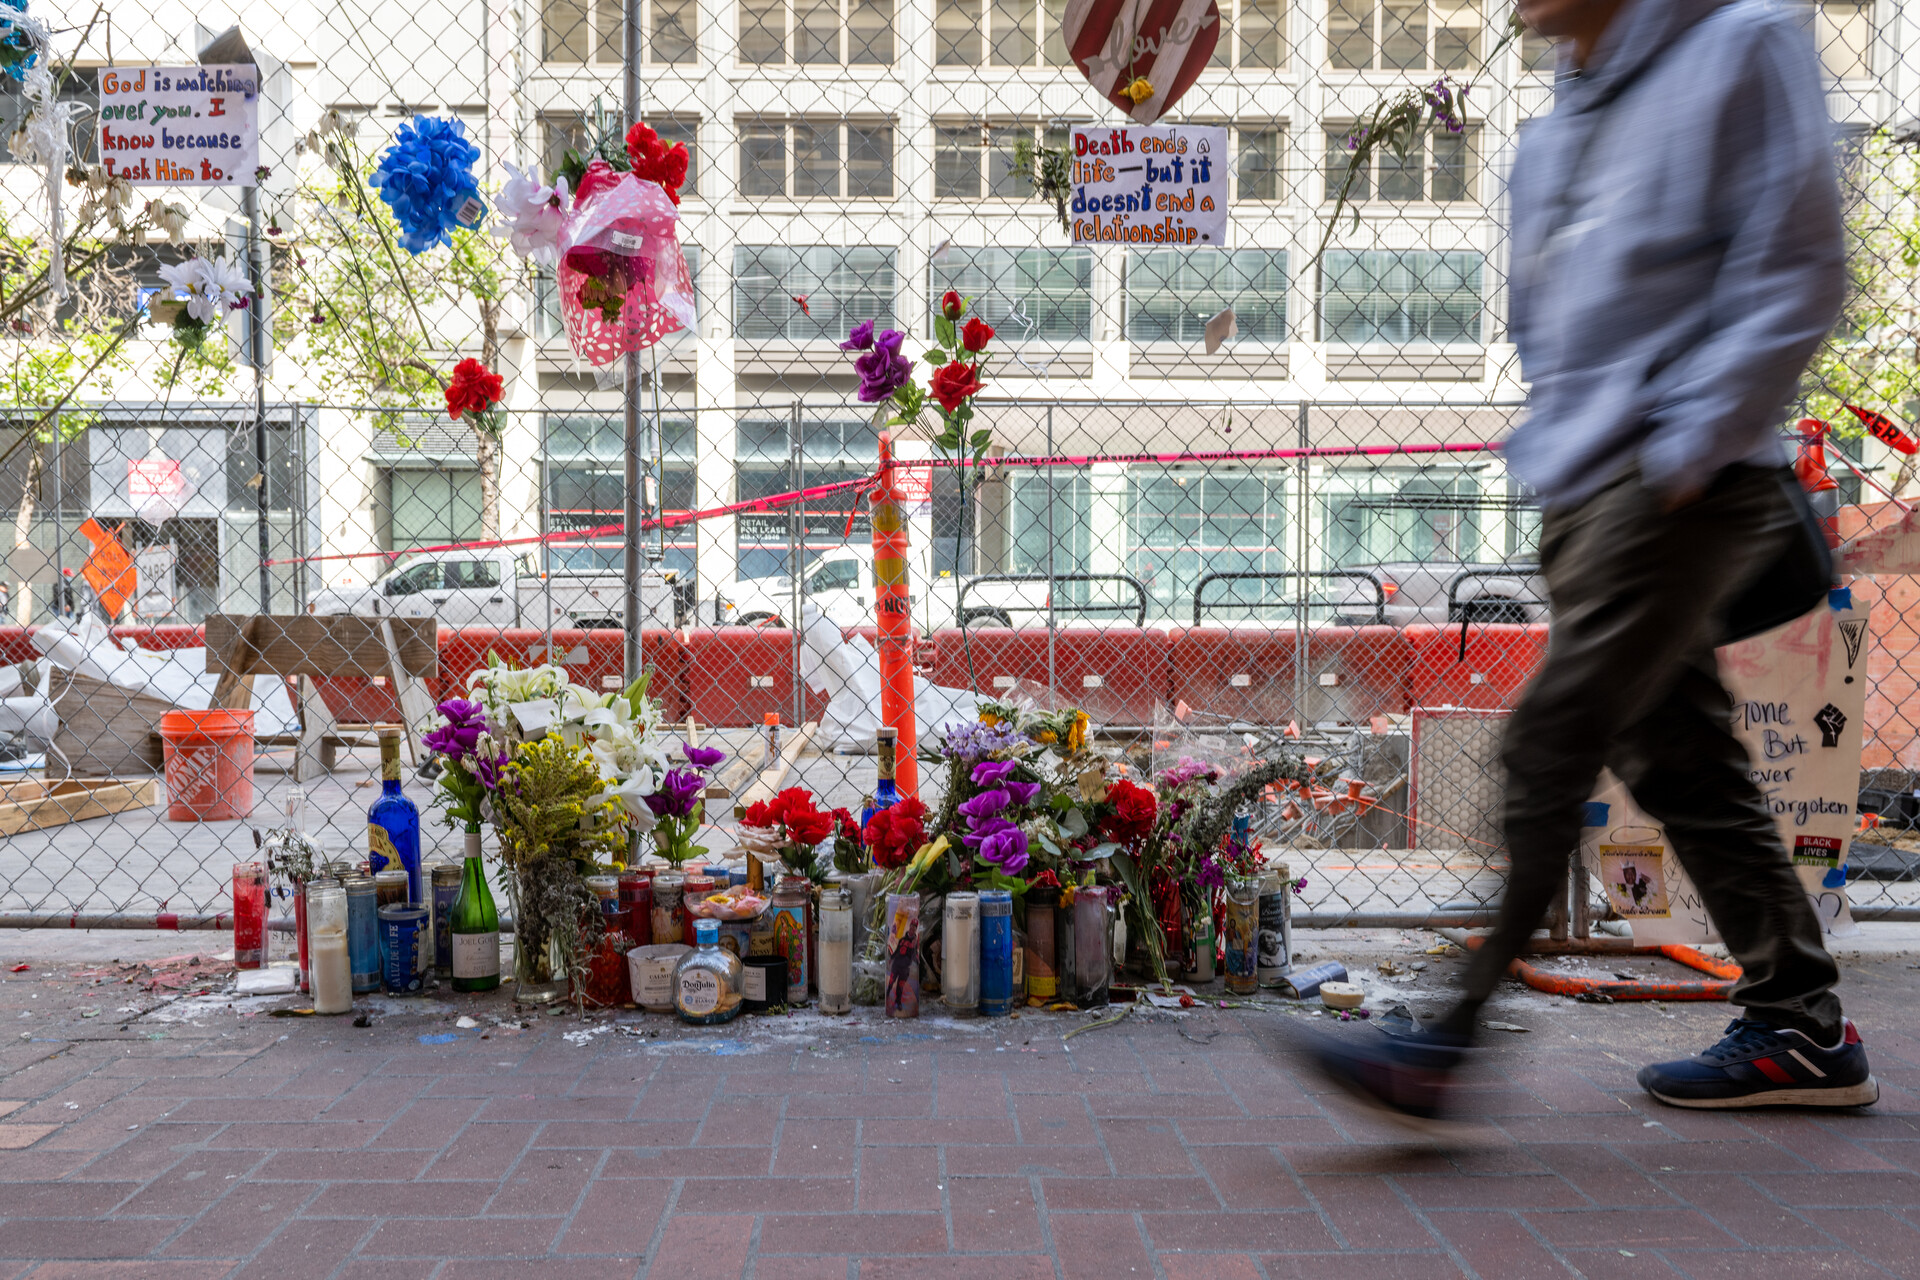 candles, photos and posters sit against a chain link fence in the background as the blurry feet of a pedestrian walk past in the foreground